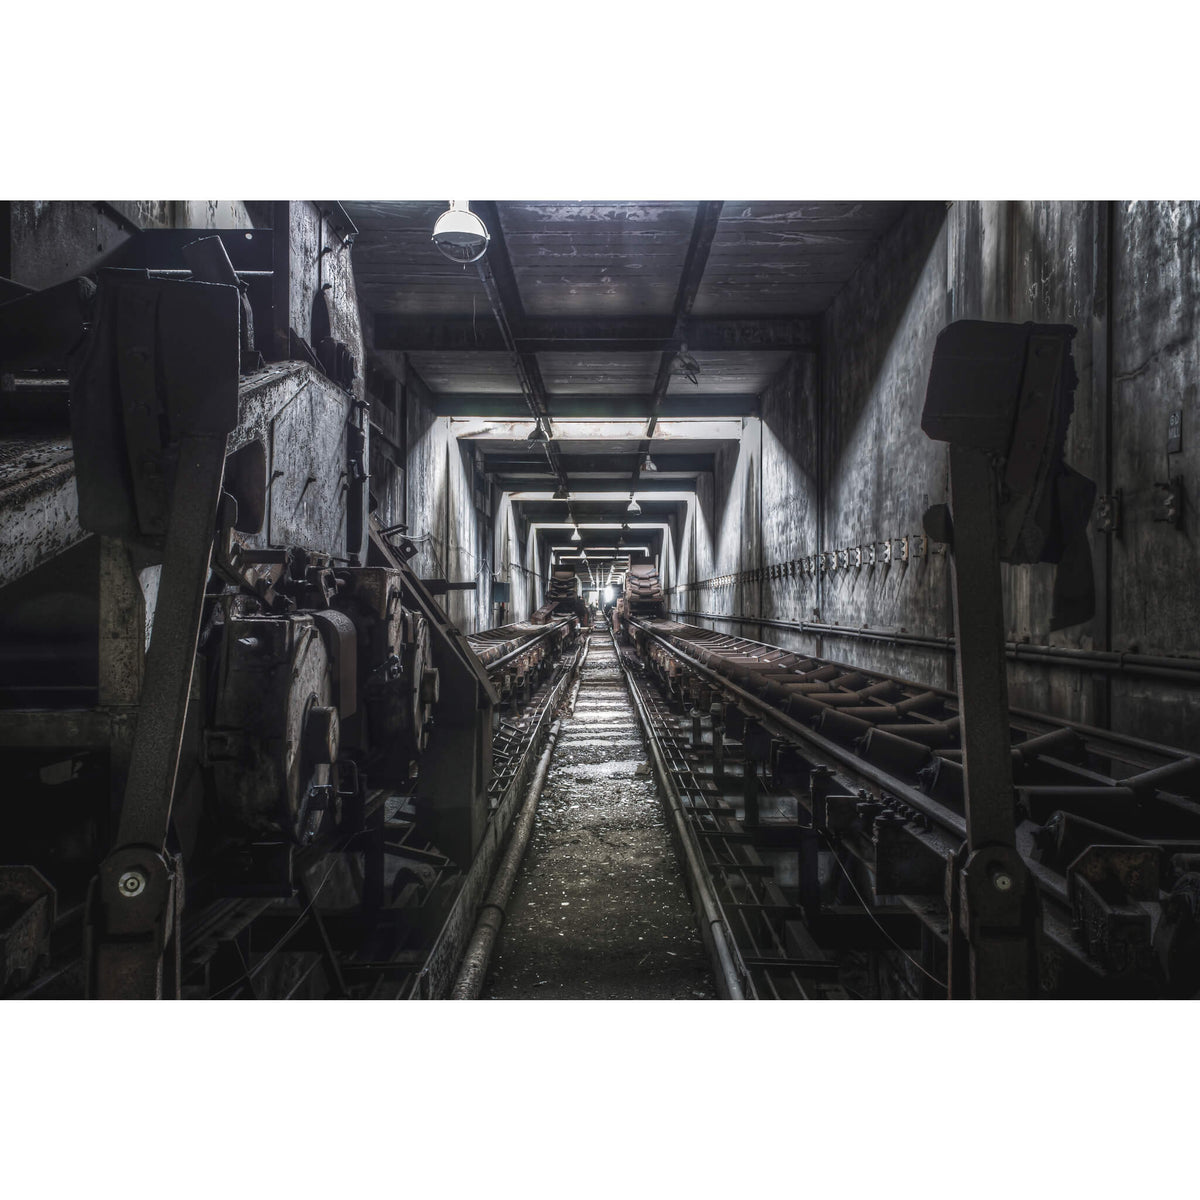 Bunker Conveyors | Wangi Power Station Fine Art Print - Lost Collective Shop